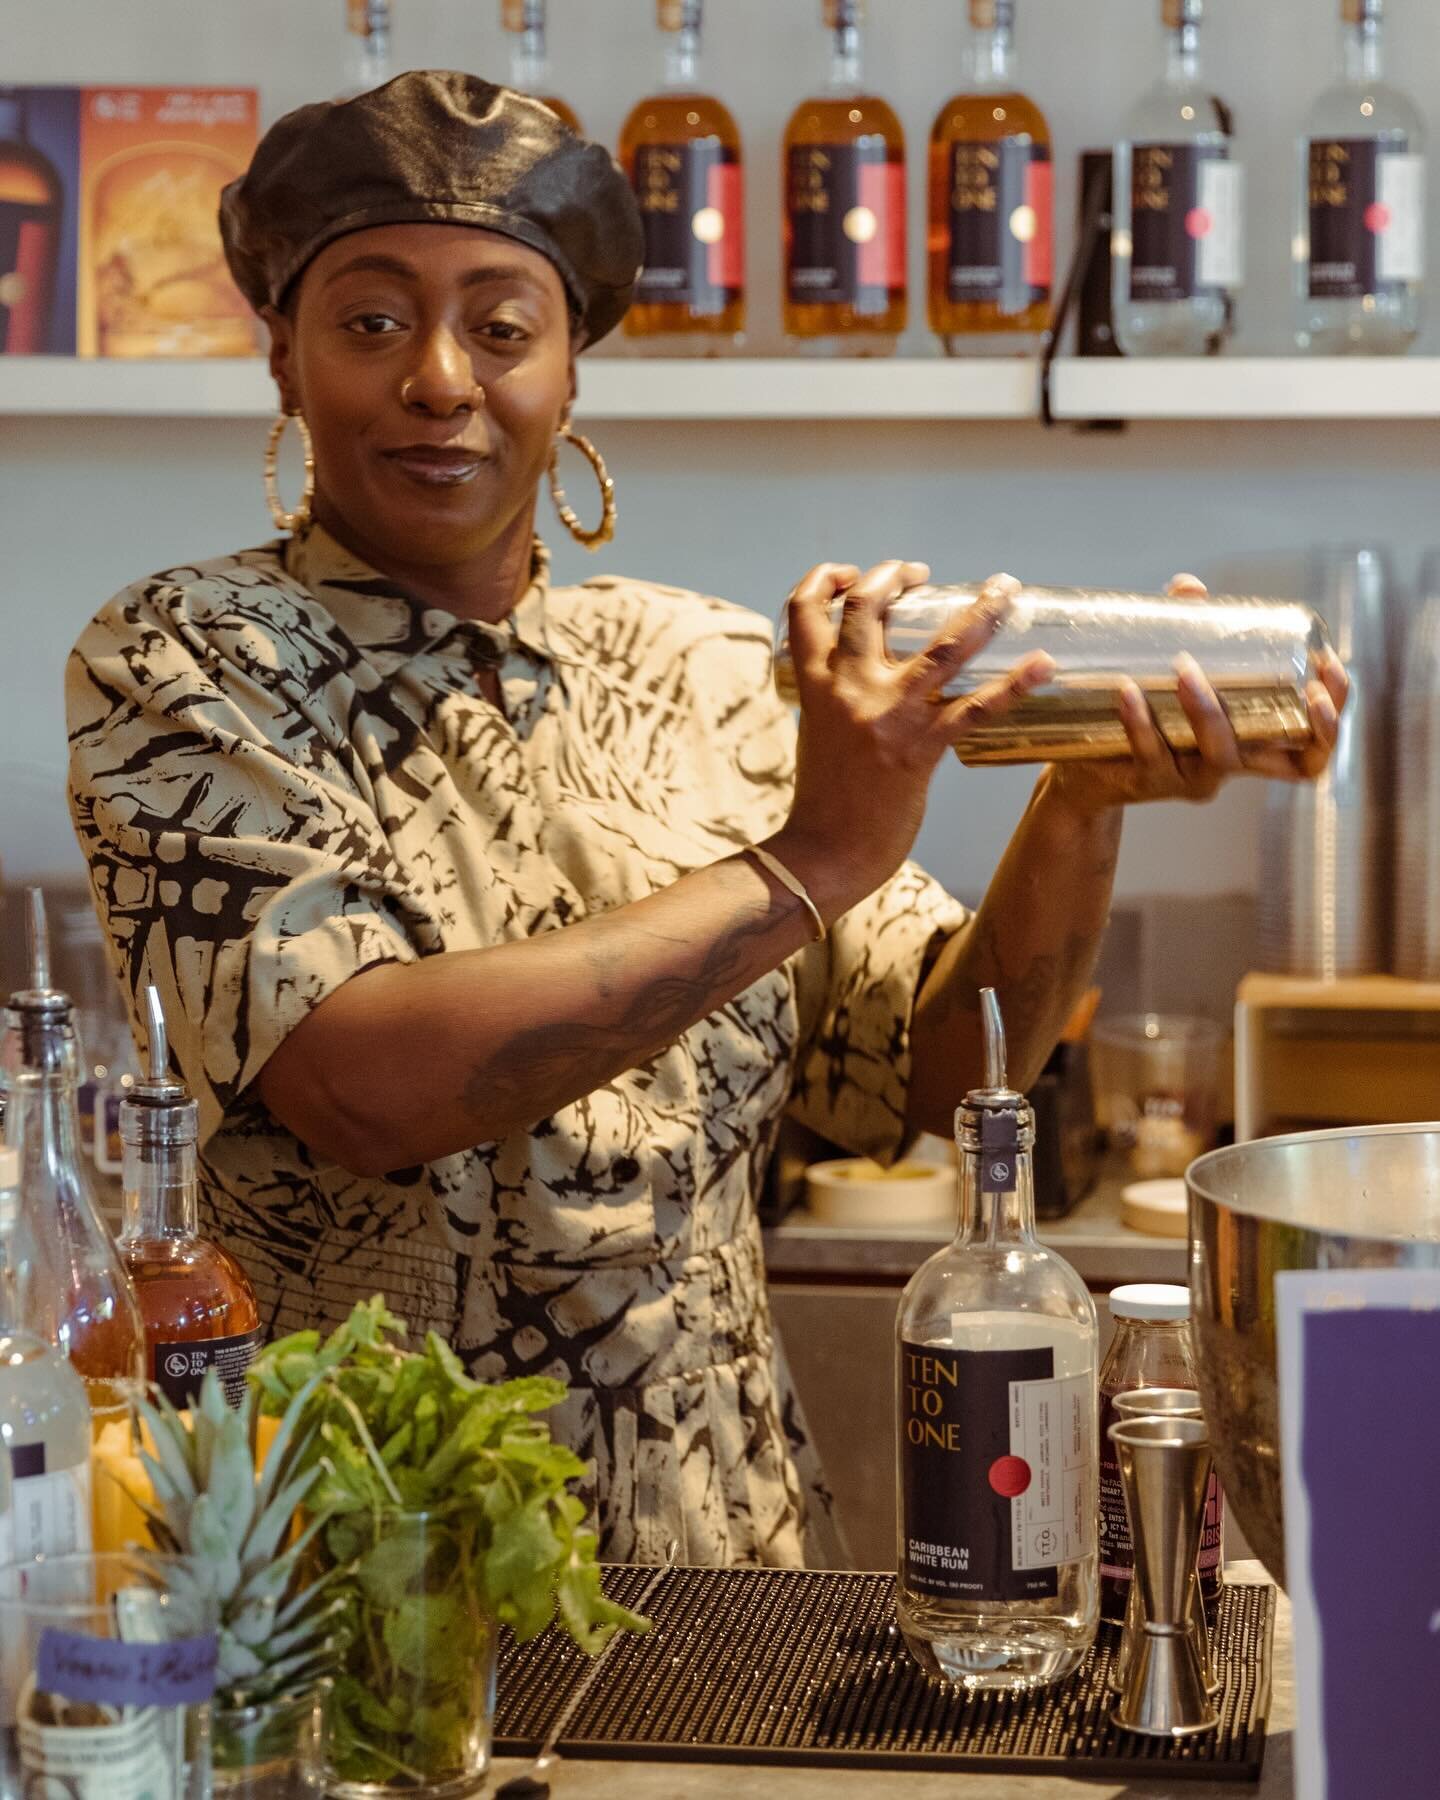 A warm welcome to Chauncey Smith, the Brooklyn based mixologist behind the Kola Nut Old Fashioned we&rsquo;re serving all month for Black History Month. Crafted with Ten to One rum, Chauncey says of their partnership, &ldquo;since the beginning the b